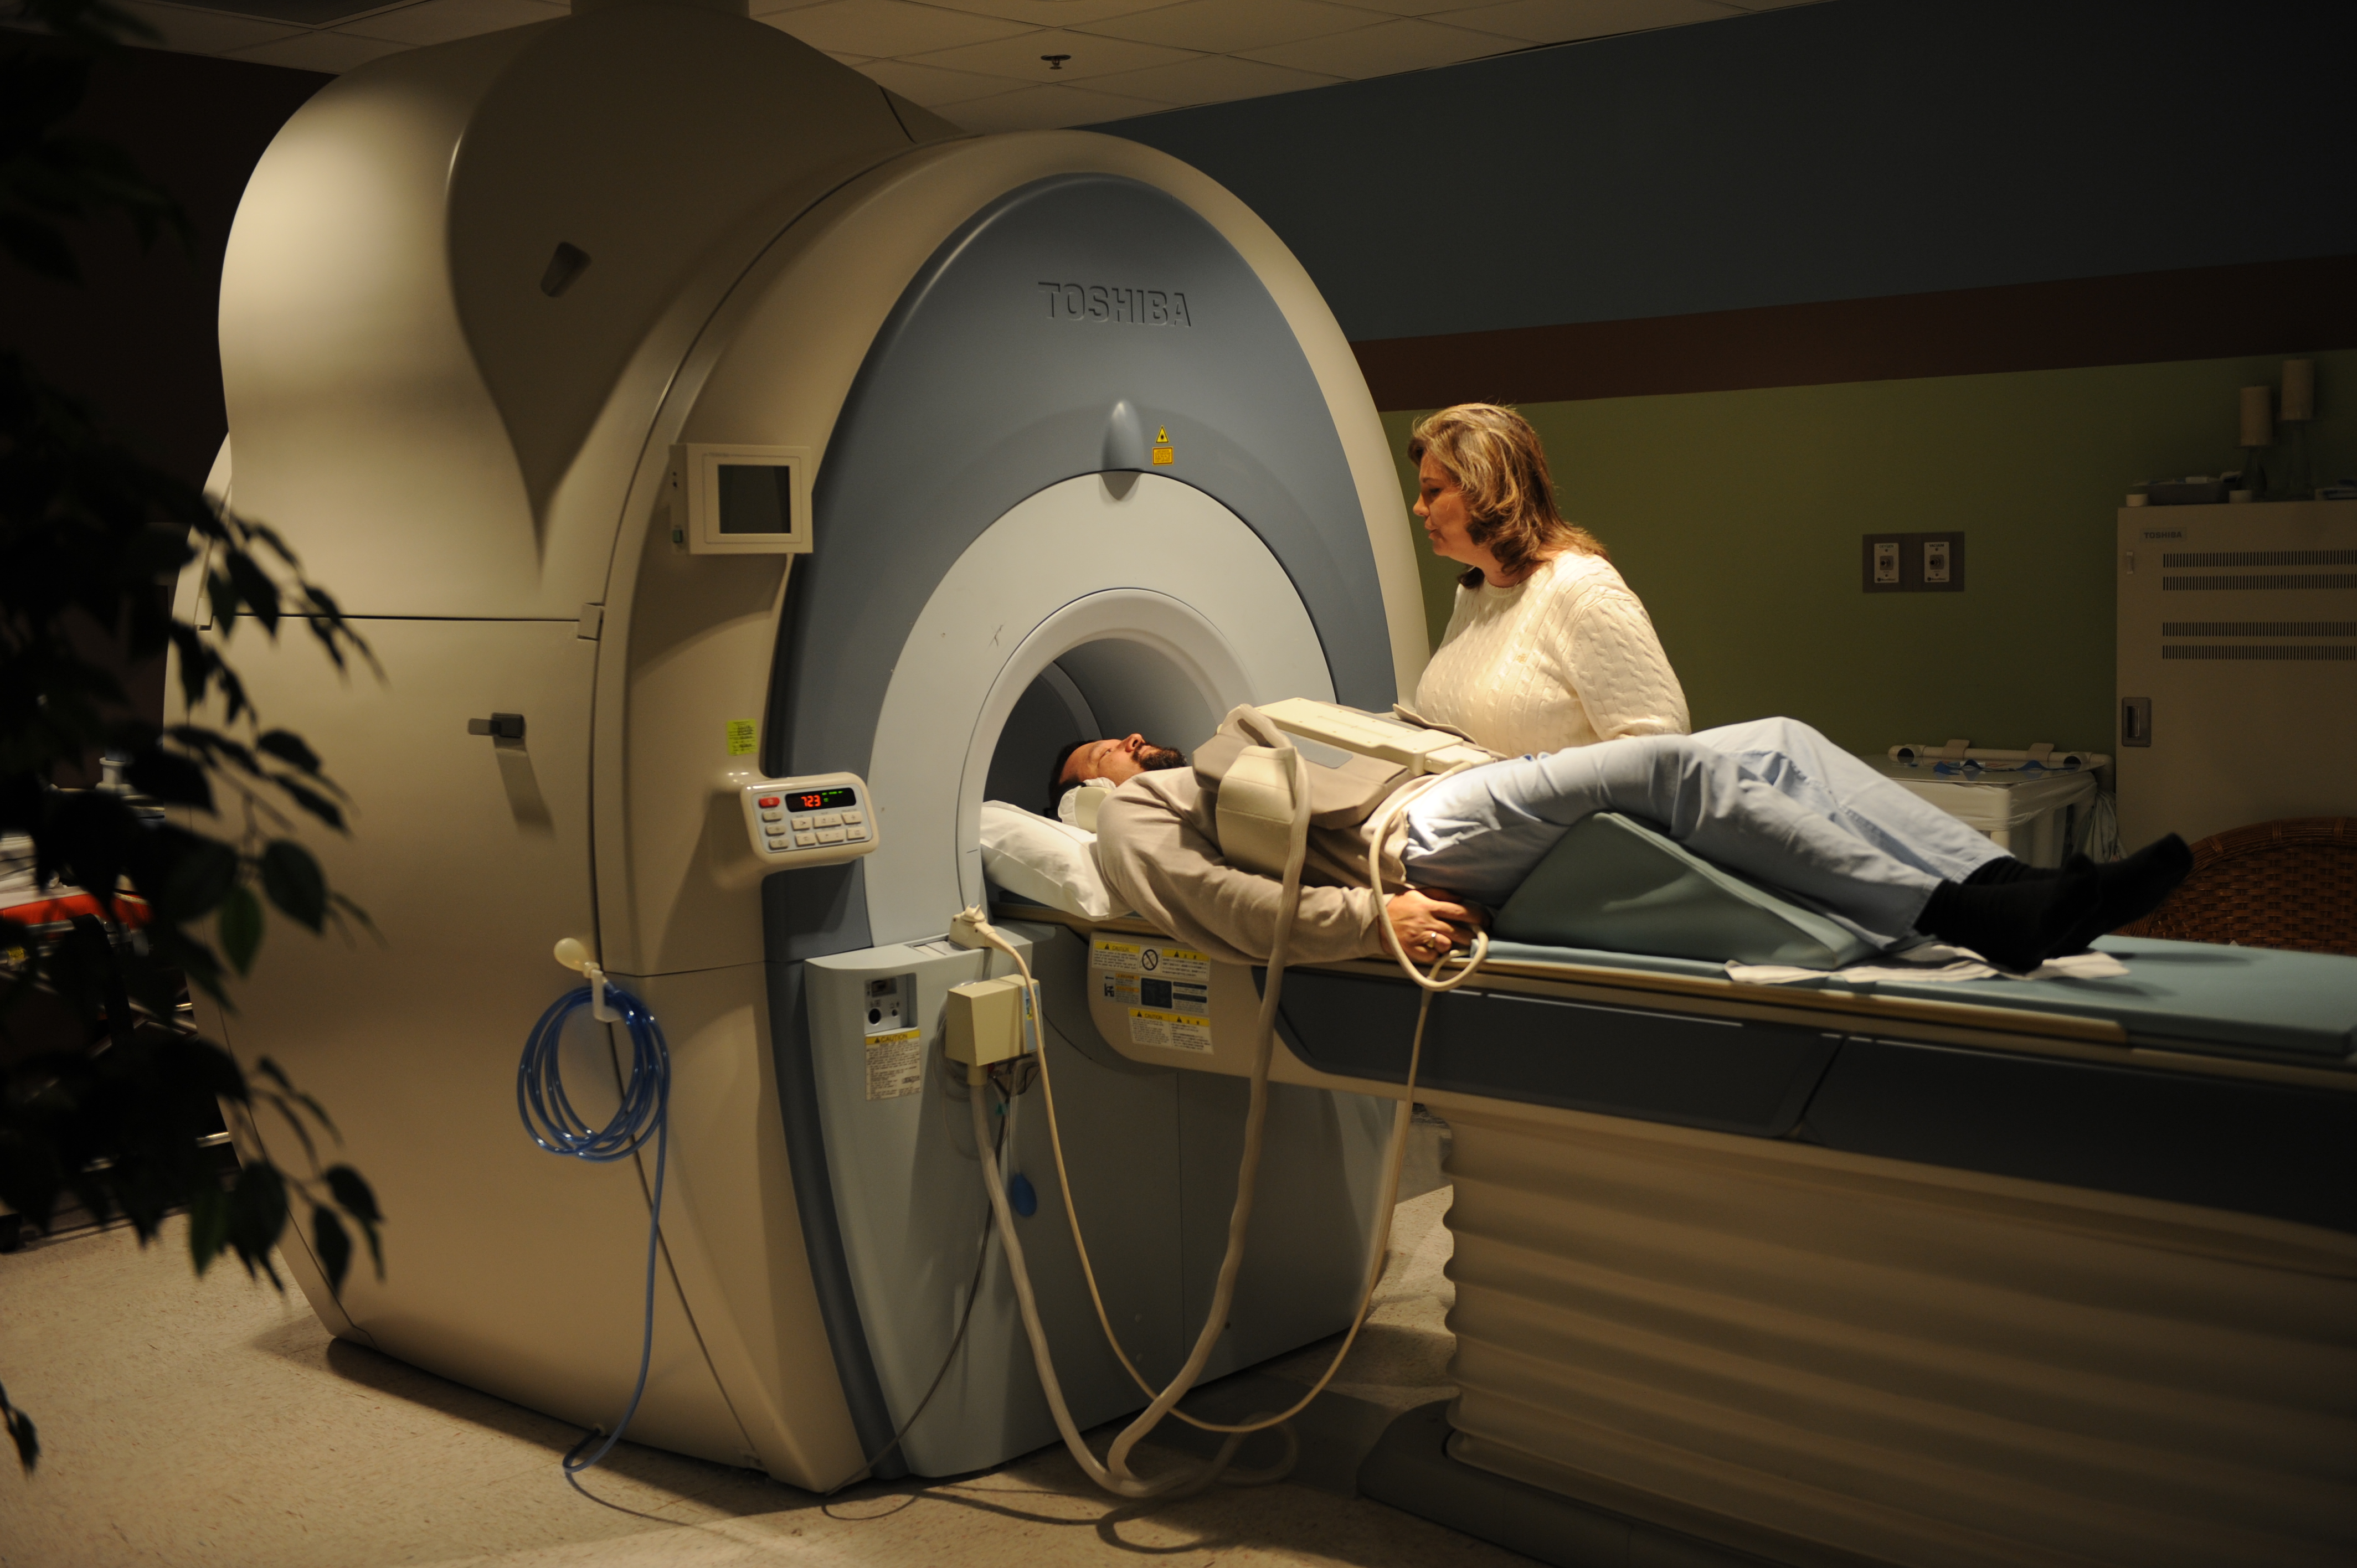 Medical Imaging Market 2023 Sales, Size, Benefits, Developments, Business Opportunities and Future Investments